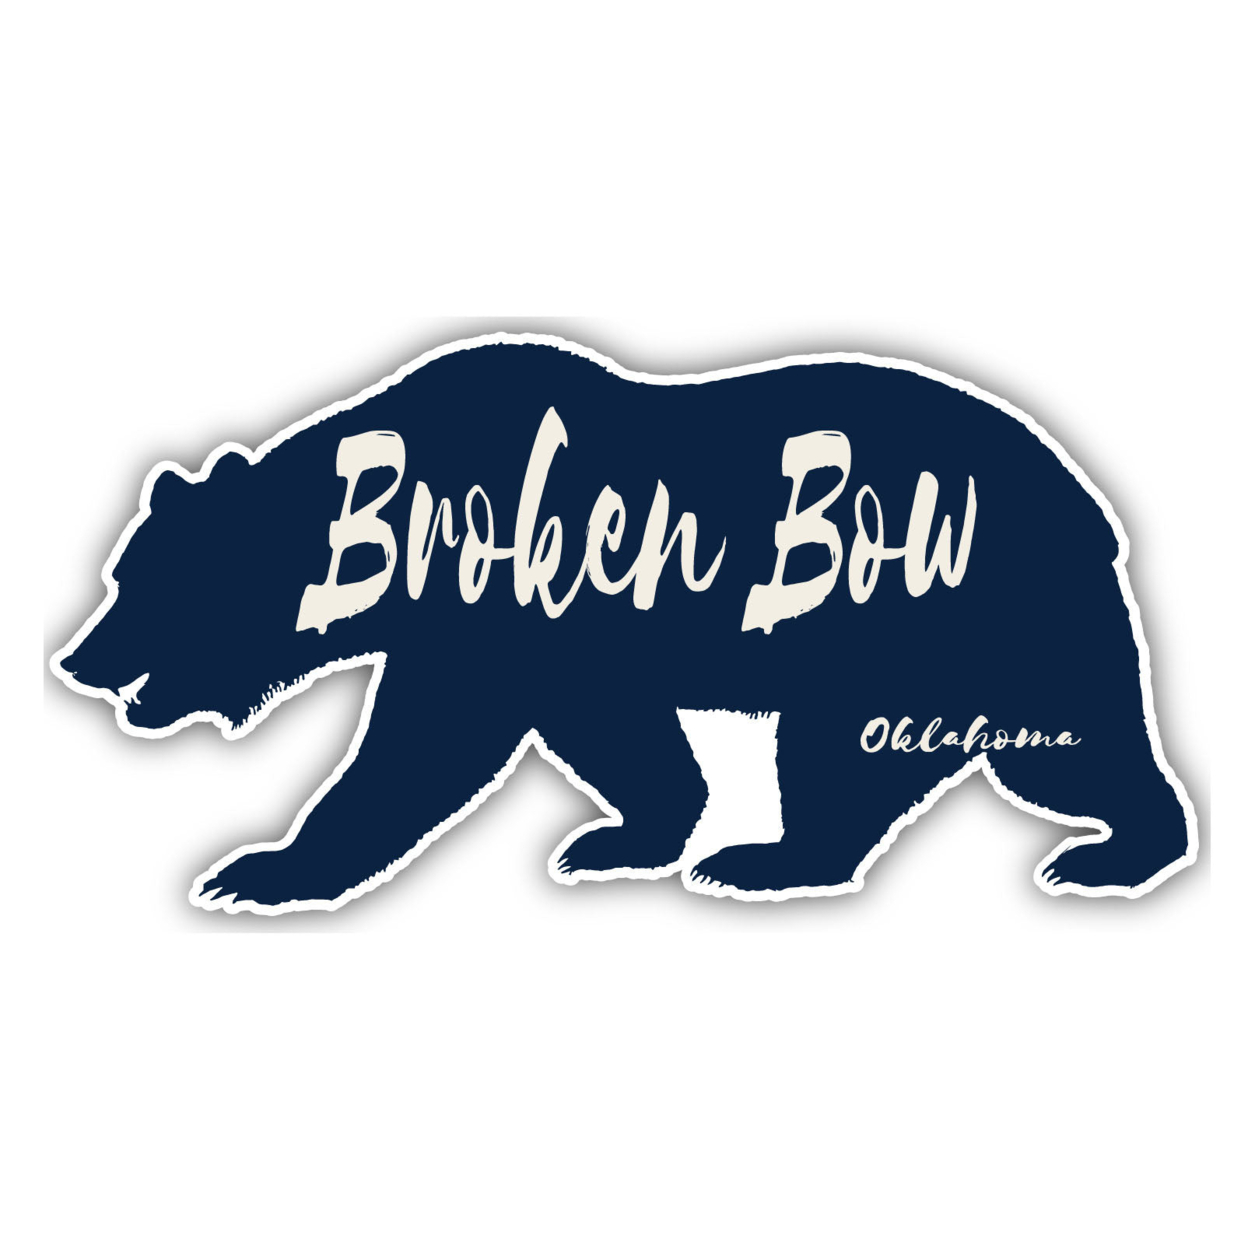 Broken Bow Oklahoma Souvenir Decorative Stickers (Choose Theme And Size) - 4-Pack, 6-Inch, Bear